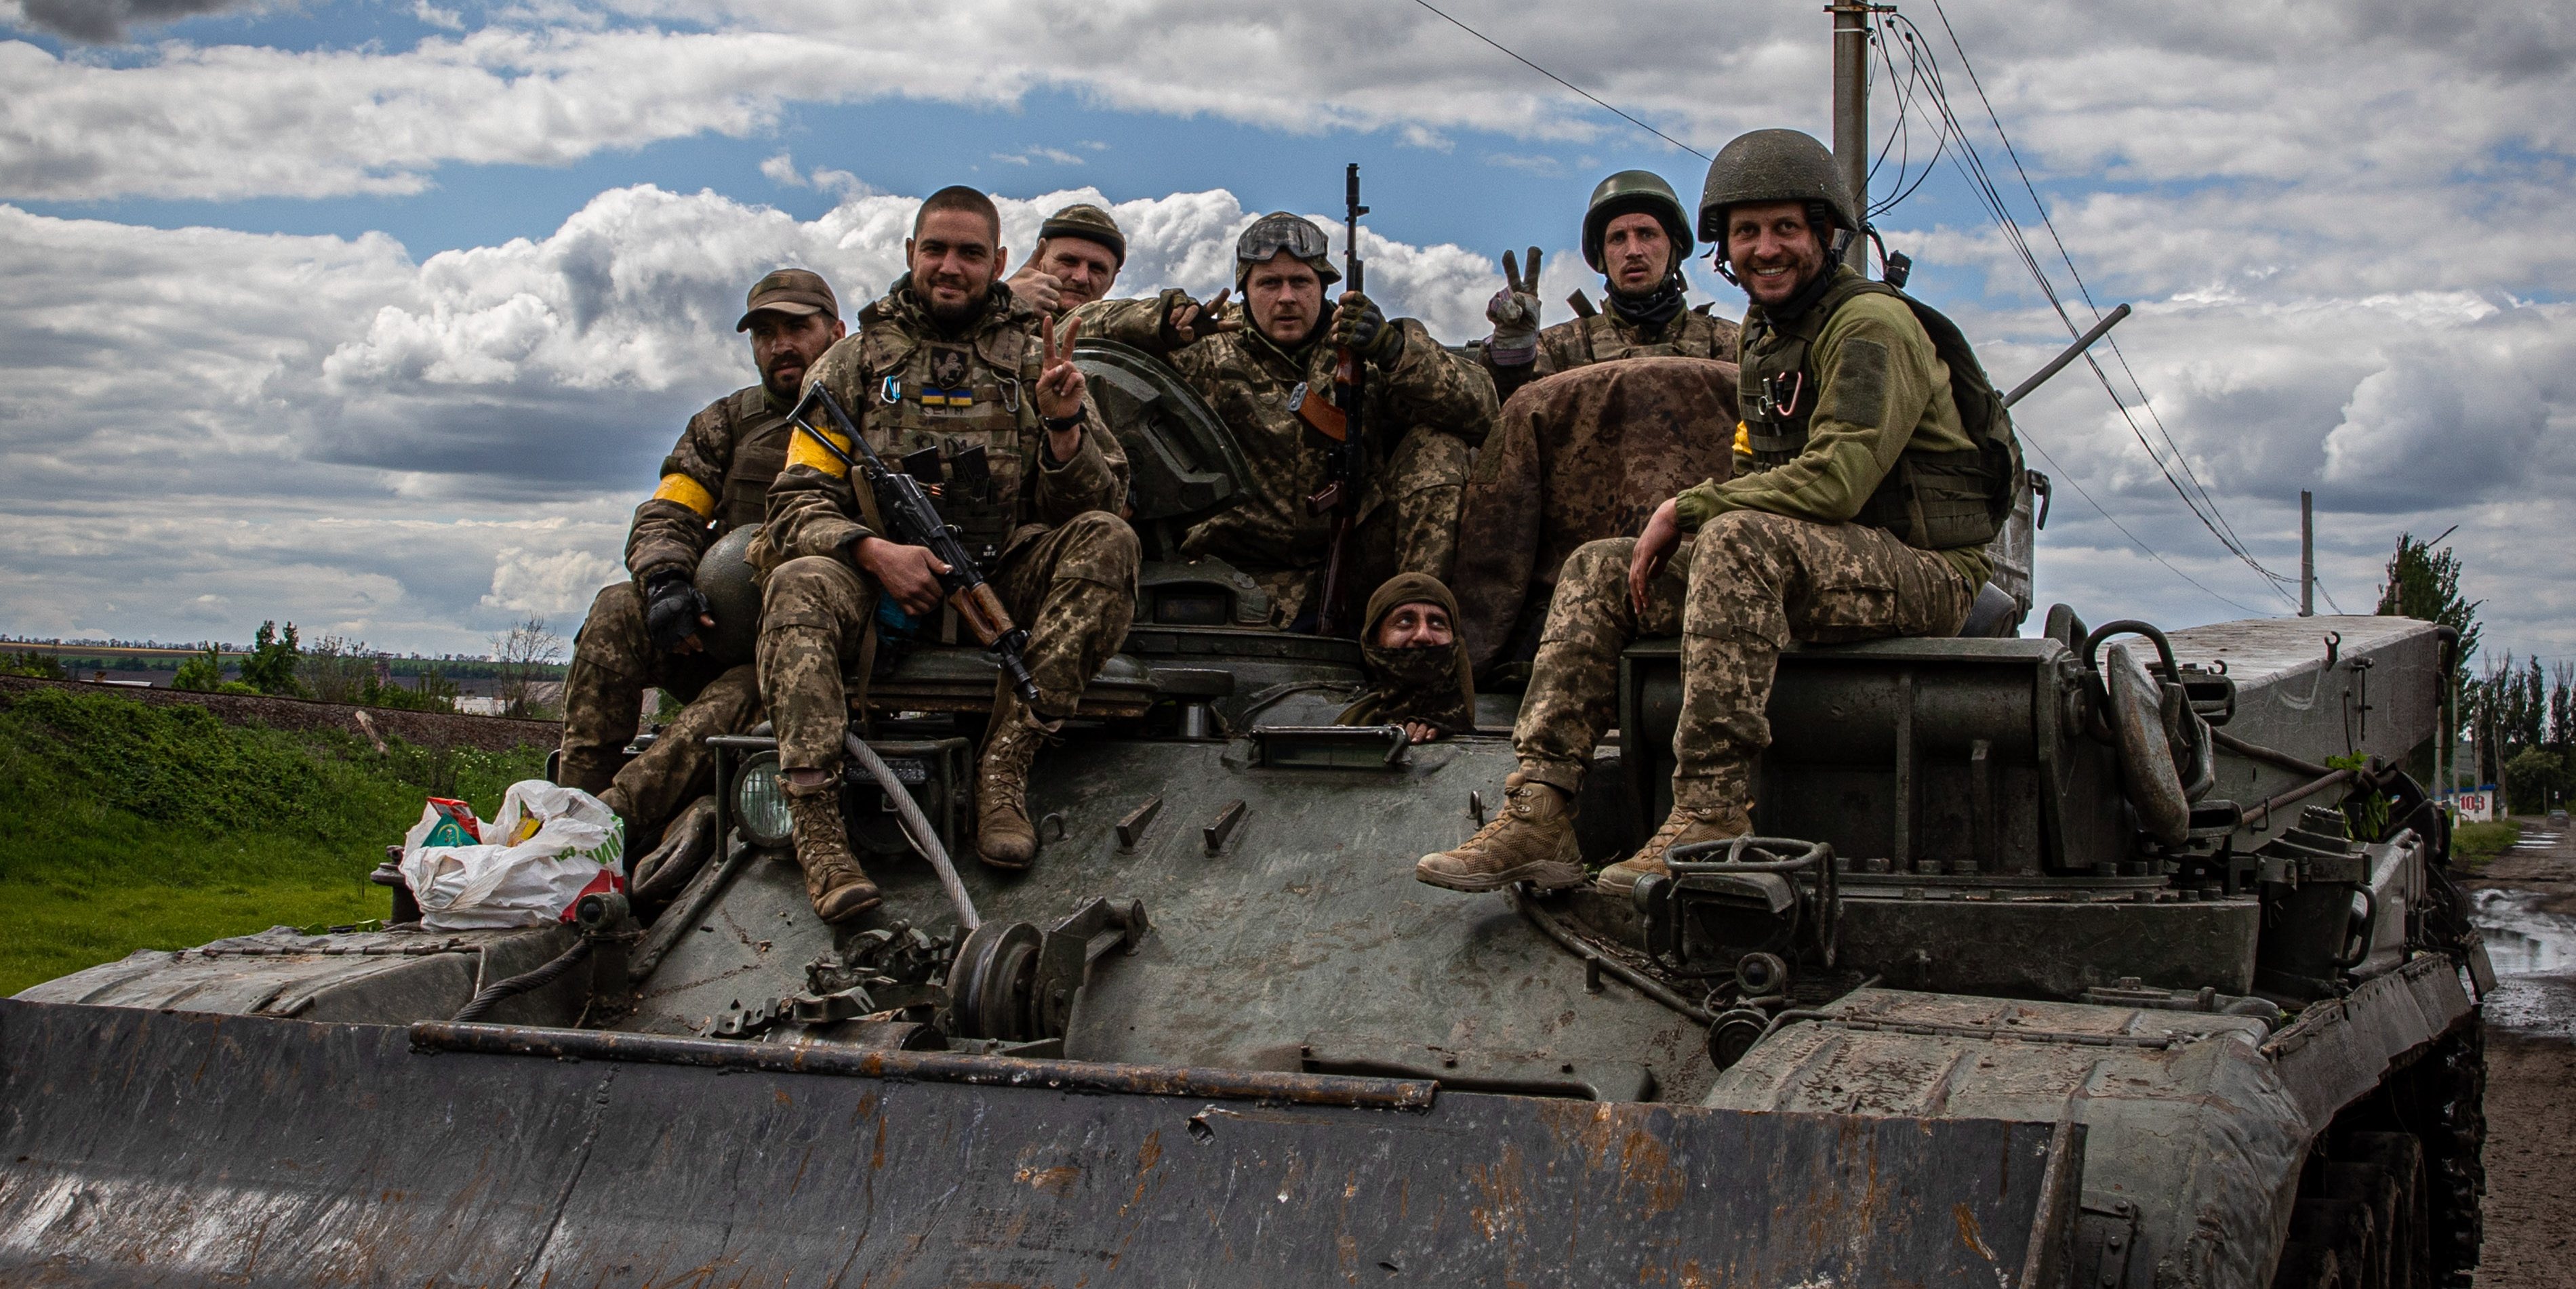 Ukrainian soldiers sitting on the armored vehicle depart for